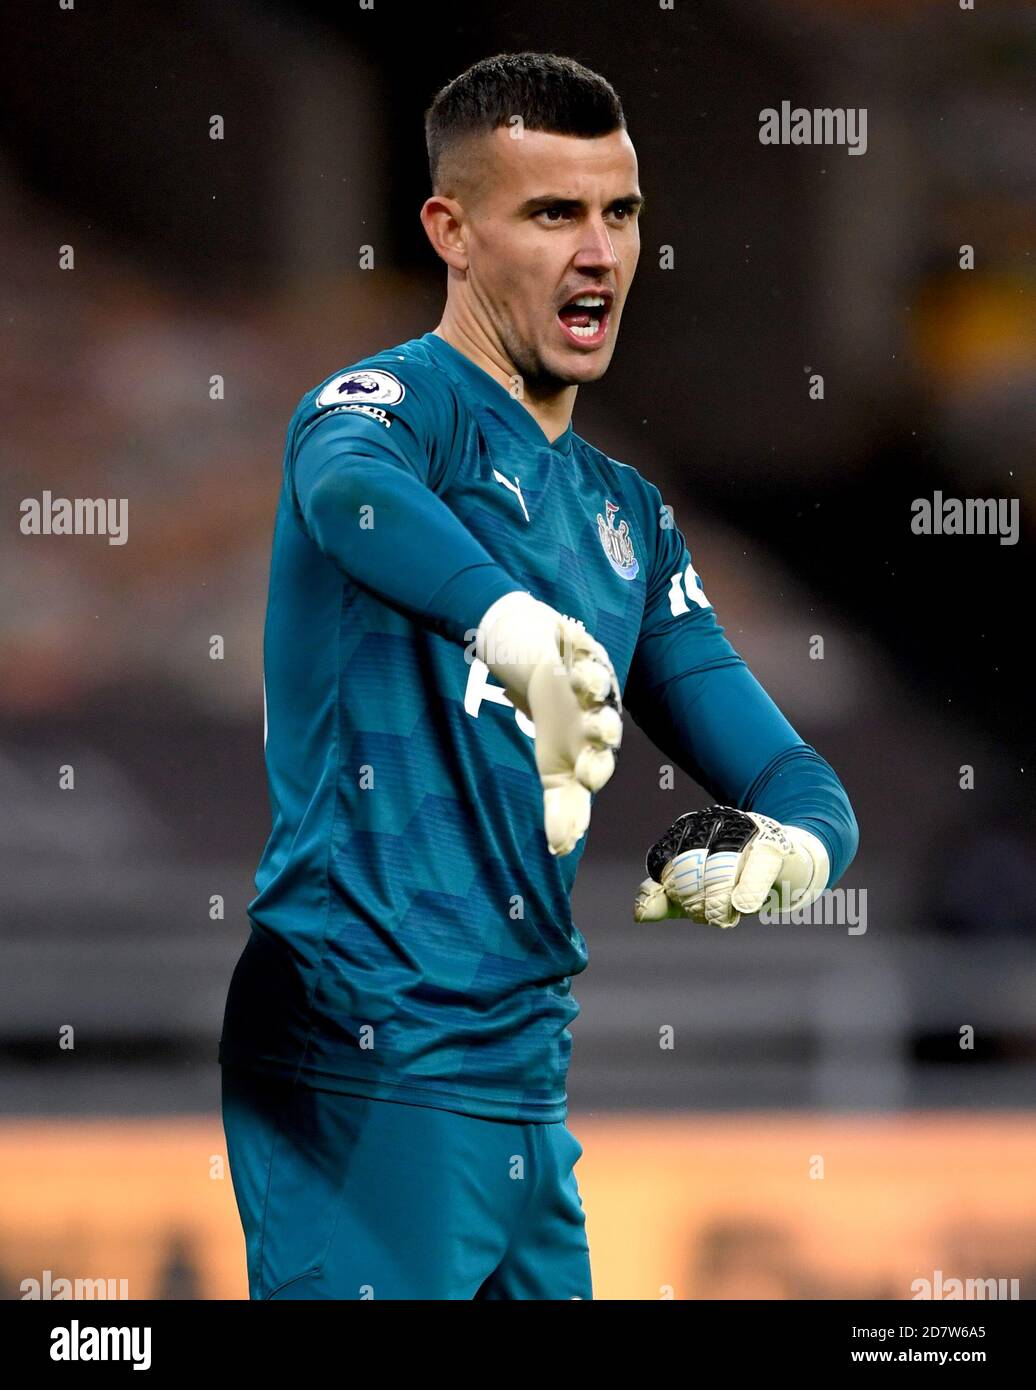 Newcastle United goalkeeper Karl Darlow during the Premier League match at Molineux, Wolverhampton. Stock Photo